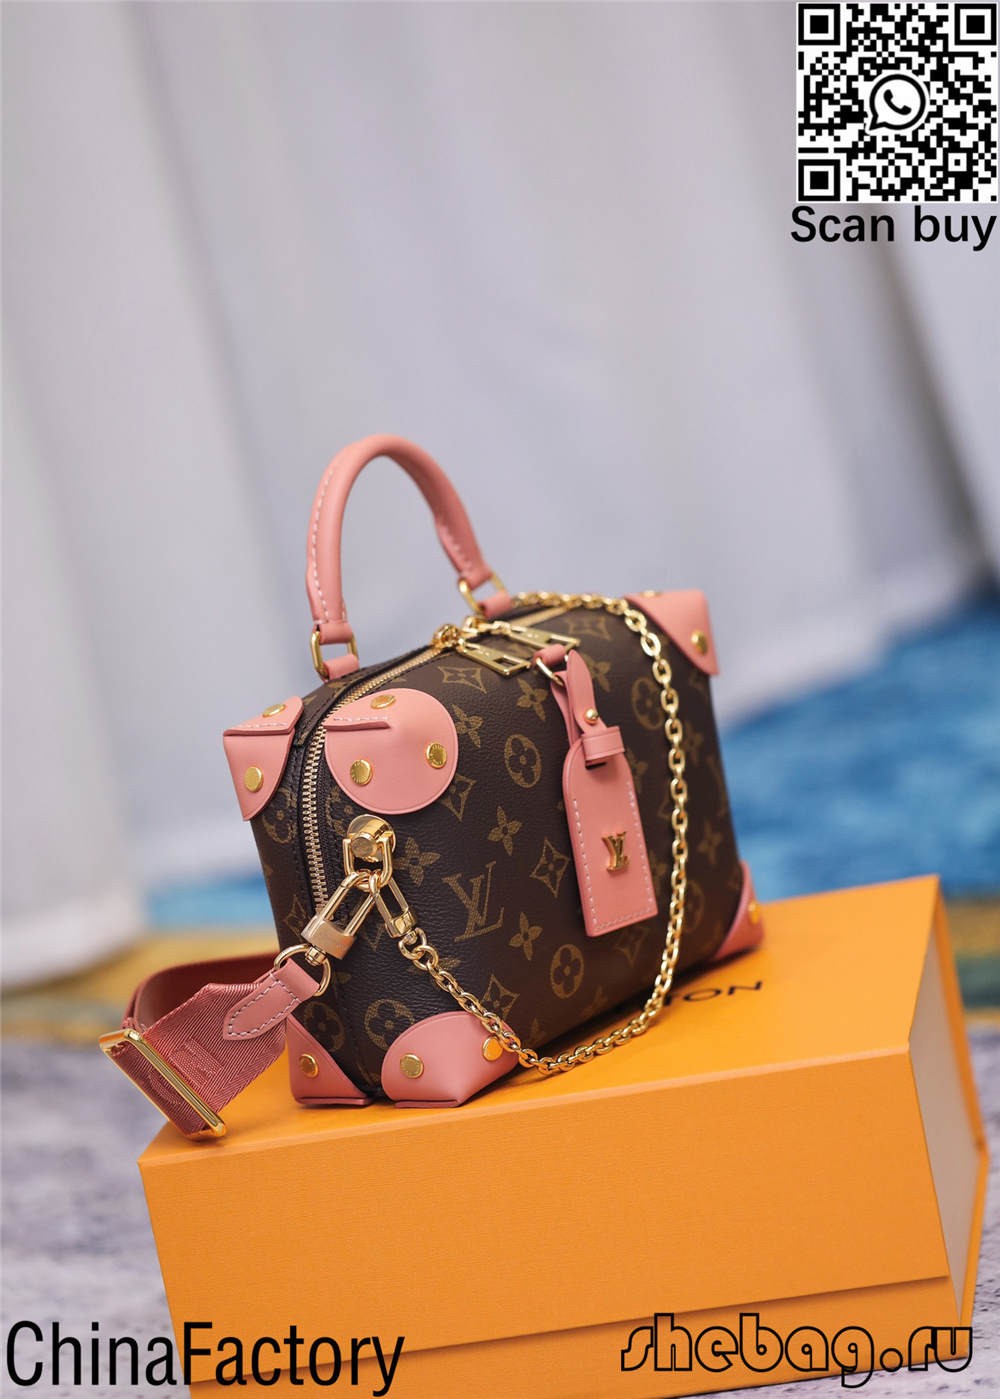 Bags replica high quality LV luggage bag online shopping (2022 updated)-Best Quality Fake designer Bag Review, Replica designer bag ru